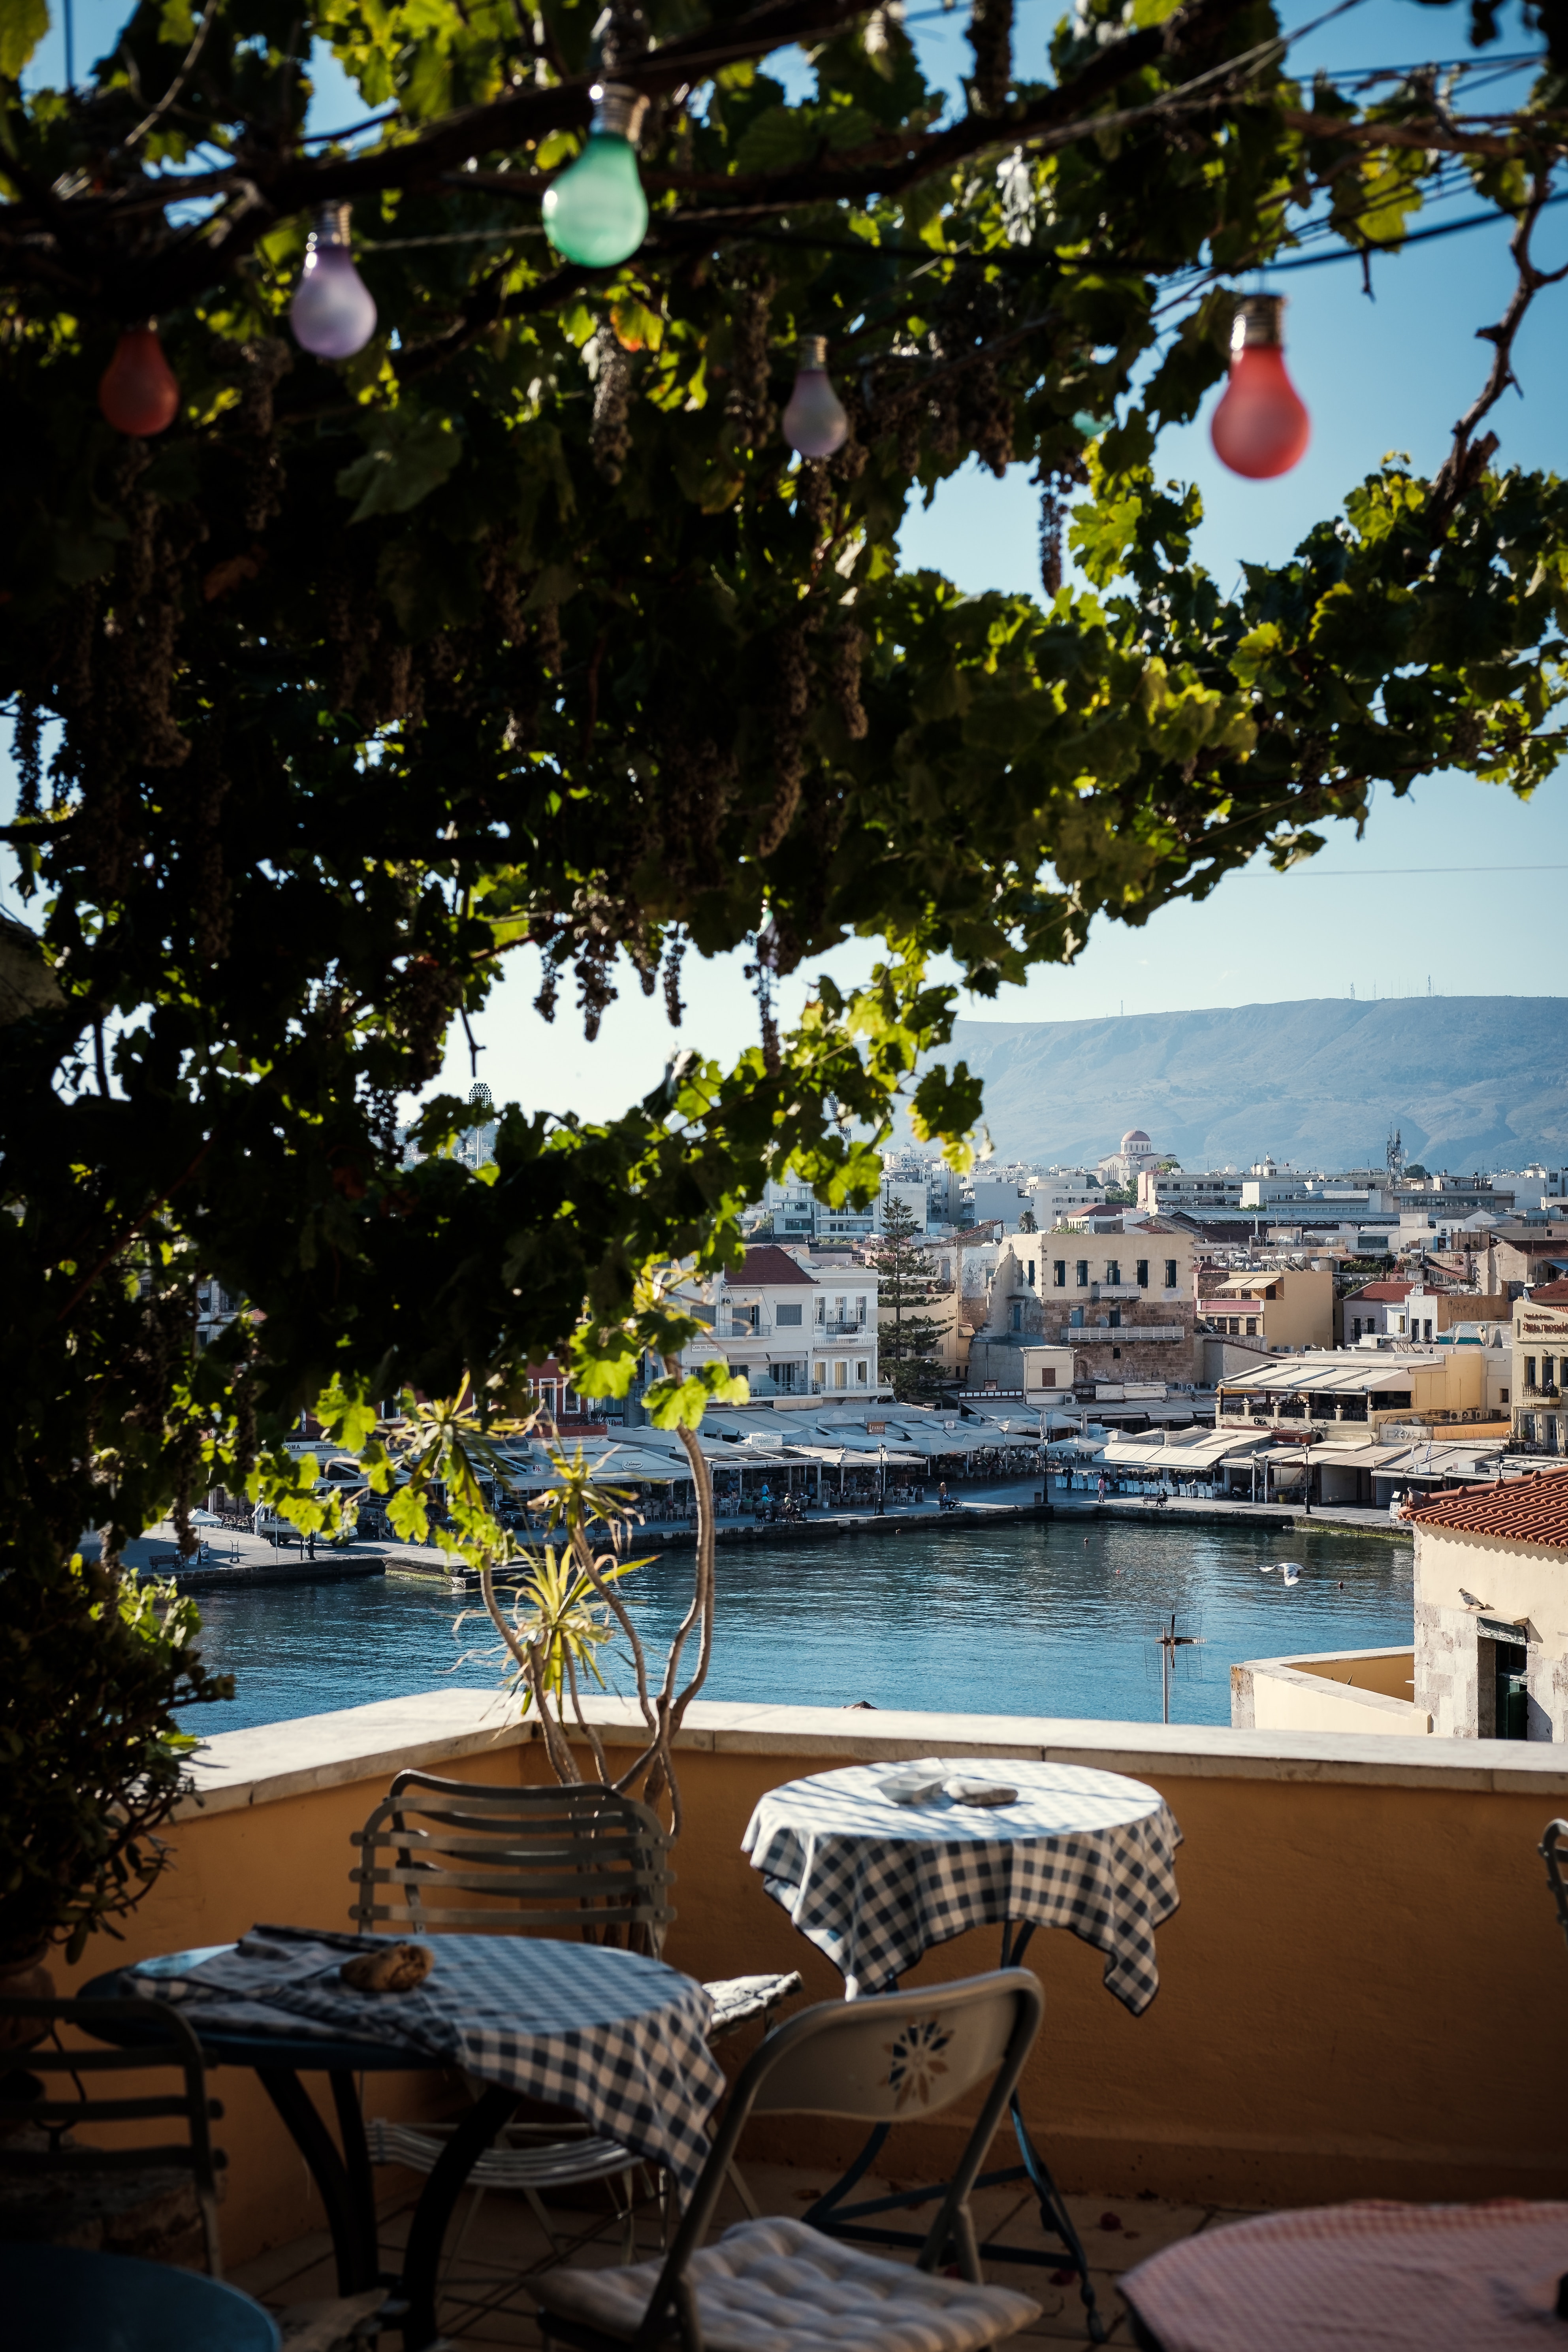 A tranquil patio with table and chairs looks over the waterfront old town in Chania, Crete.